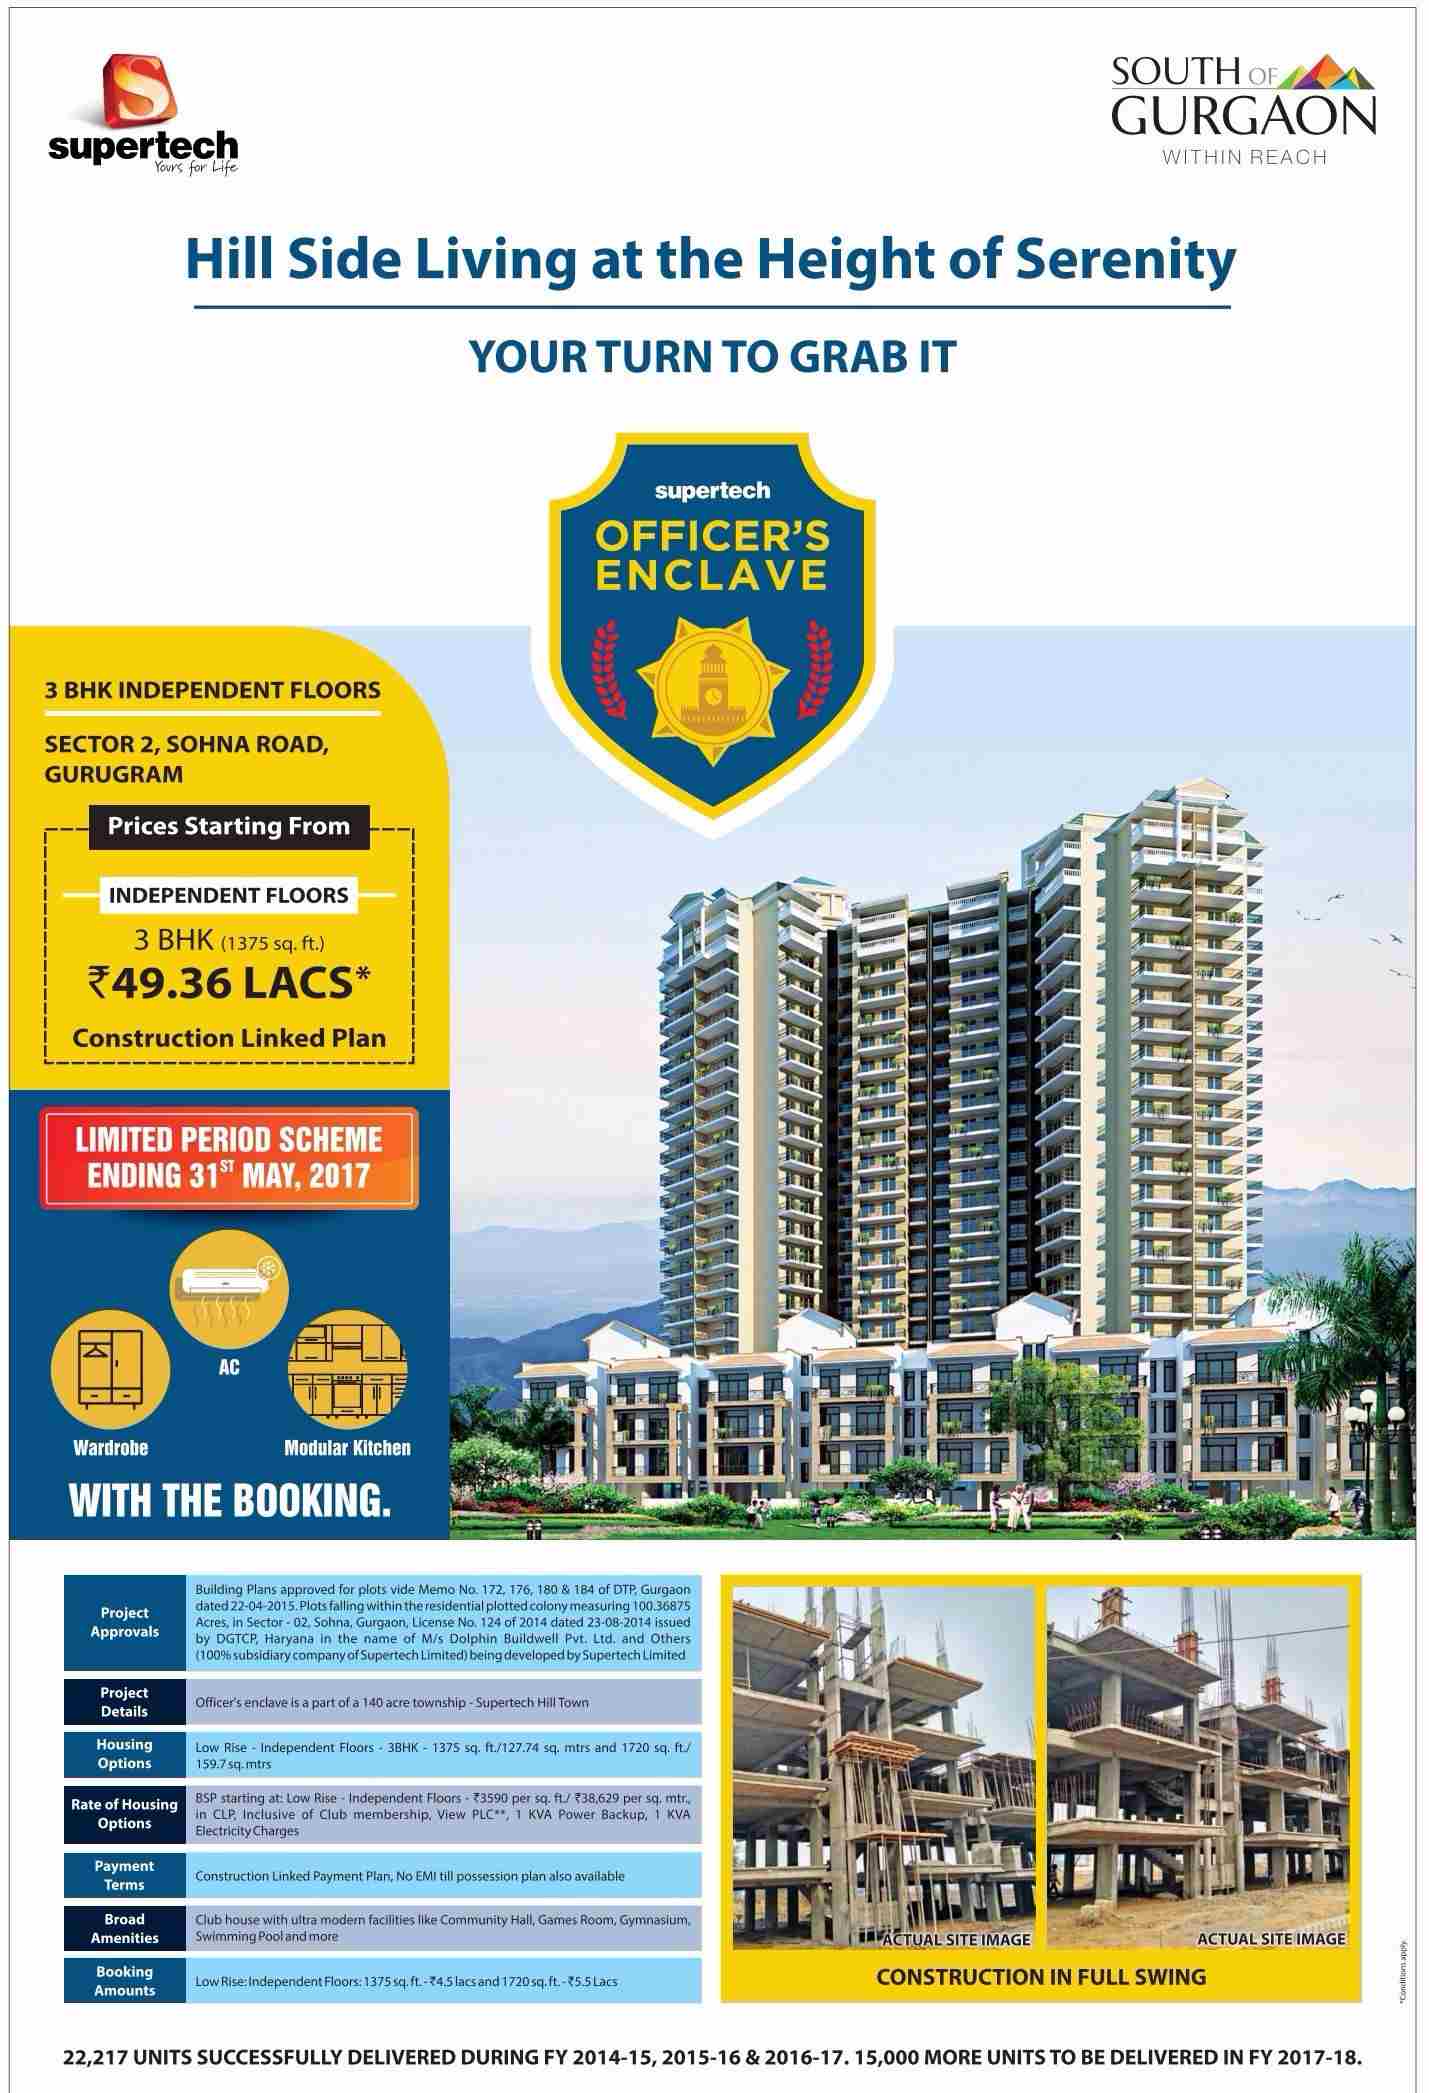 Supertech Launches Independent Floors in Officers Enclave